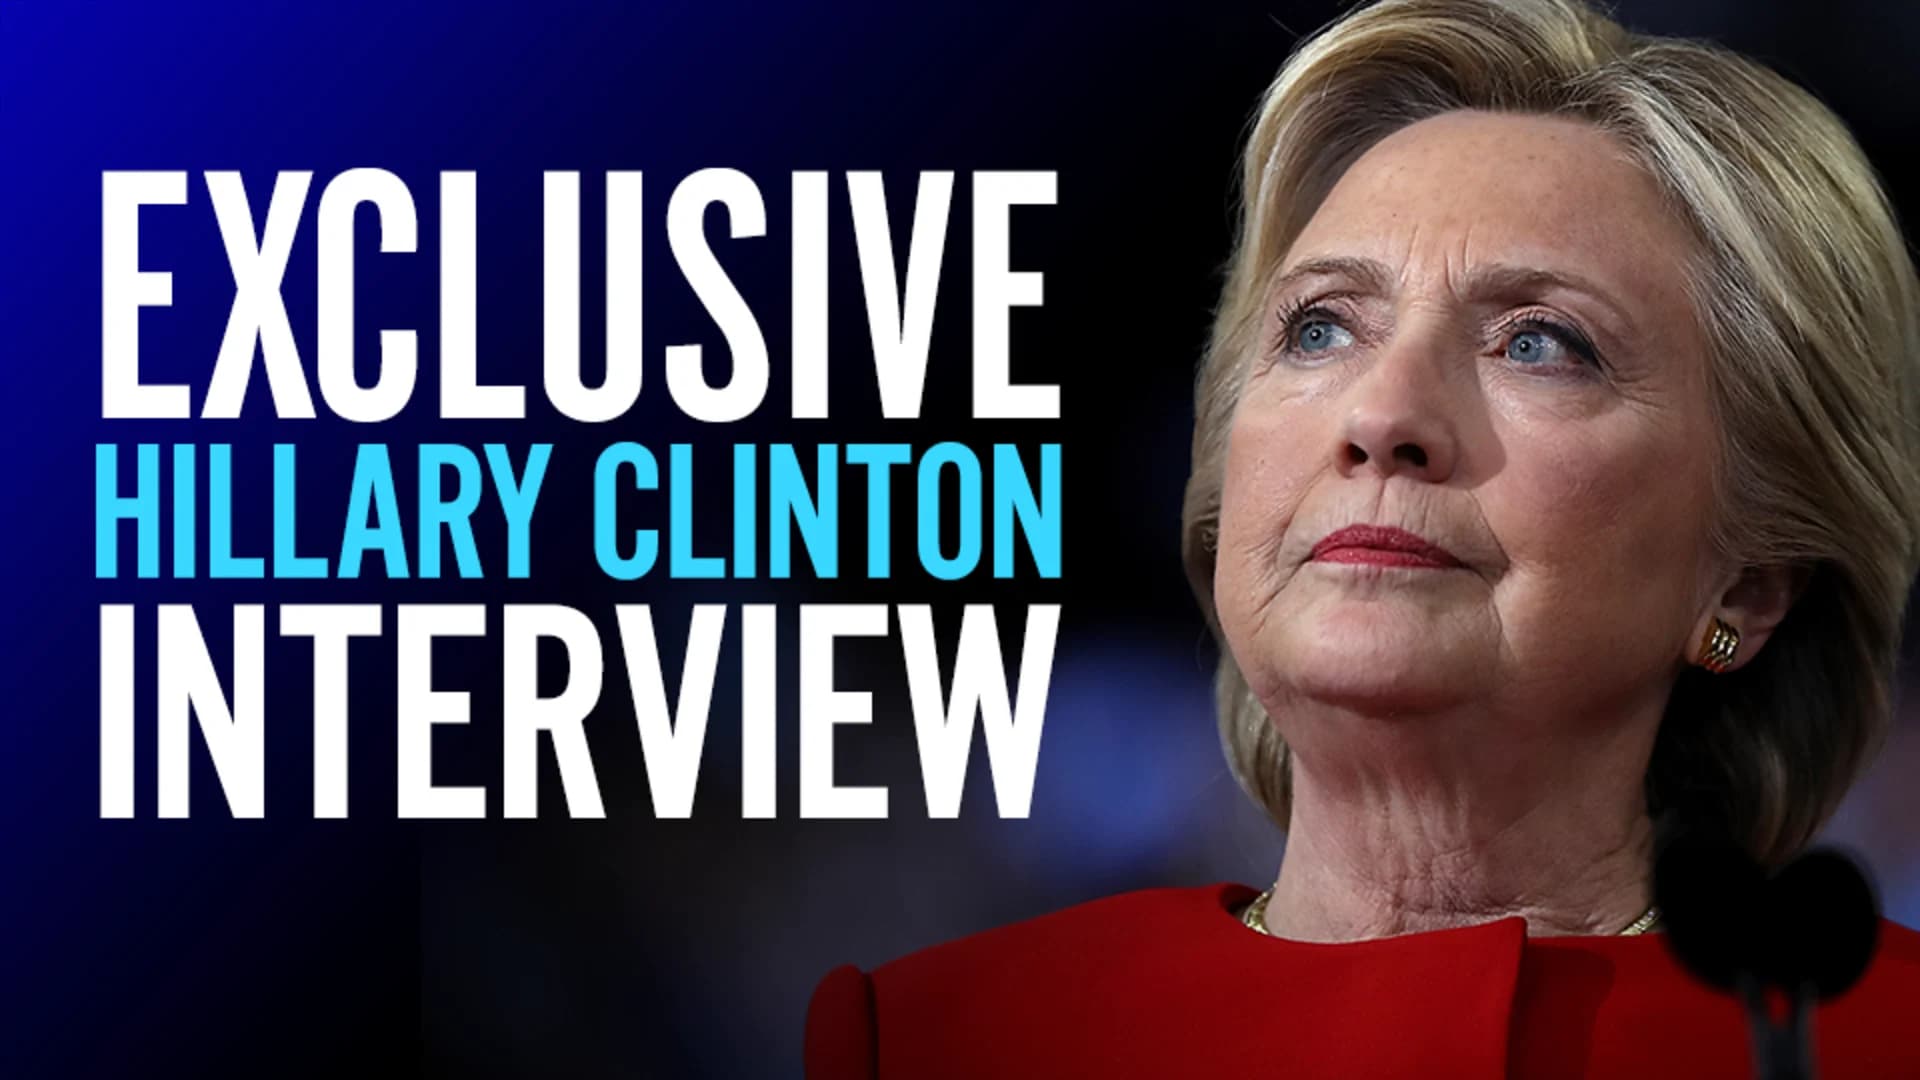 'I'm not running': Hillary Clinton rules out 2020 bid for first time on camera in exclusive interview with News 12